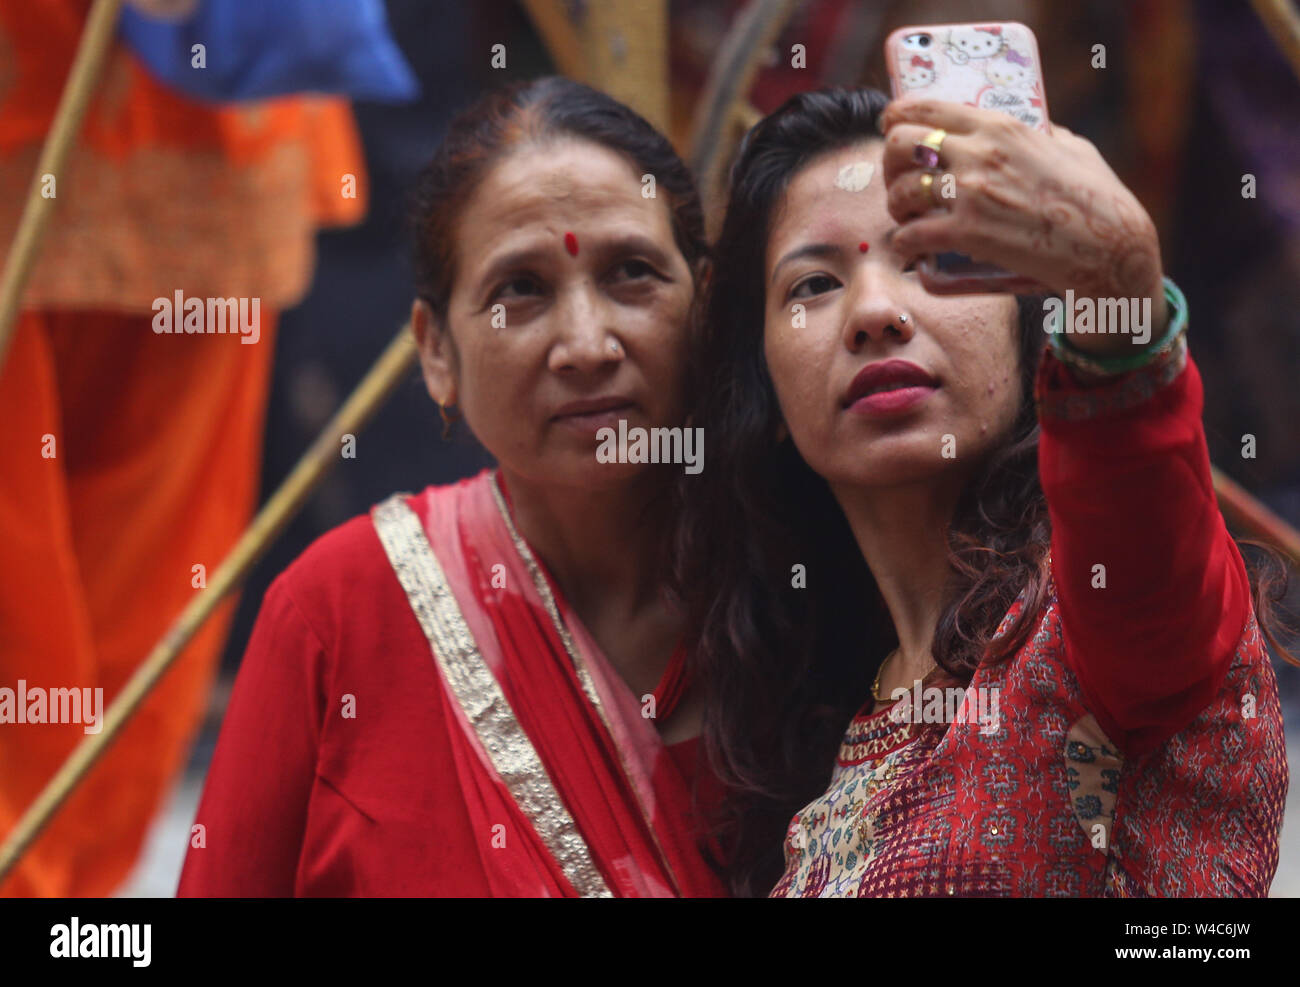 Kathmandu, Nepal. 22nd July, 2019. Women take selfies after giving offering to the Hindu god Lord Shiva, the god of destruction and creation at the Shiva temple during a Shrawan Sombar festival.Shrawan month is considered as the holiest month of the year and each Somvar (Monday) of this month is known as Shrawan Somvar, during which devotees fast and worship Lord Shiva to pray for happiness for their families. Credit: SOPA Images Limited/Alamy Live News Stock Photo